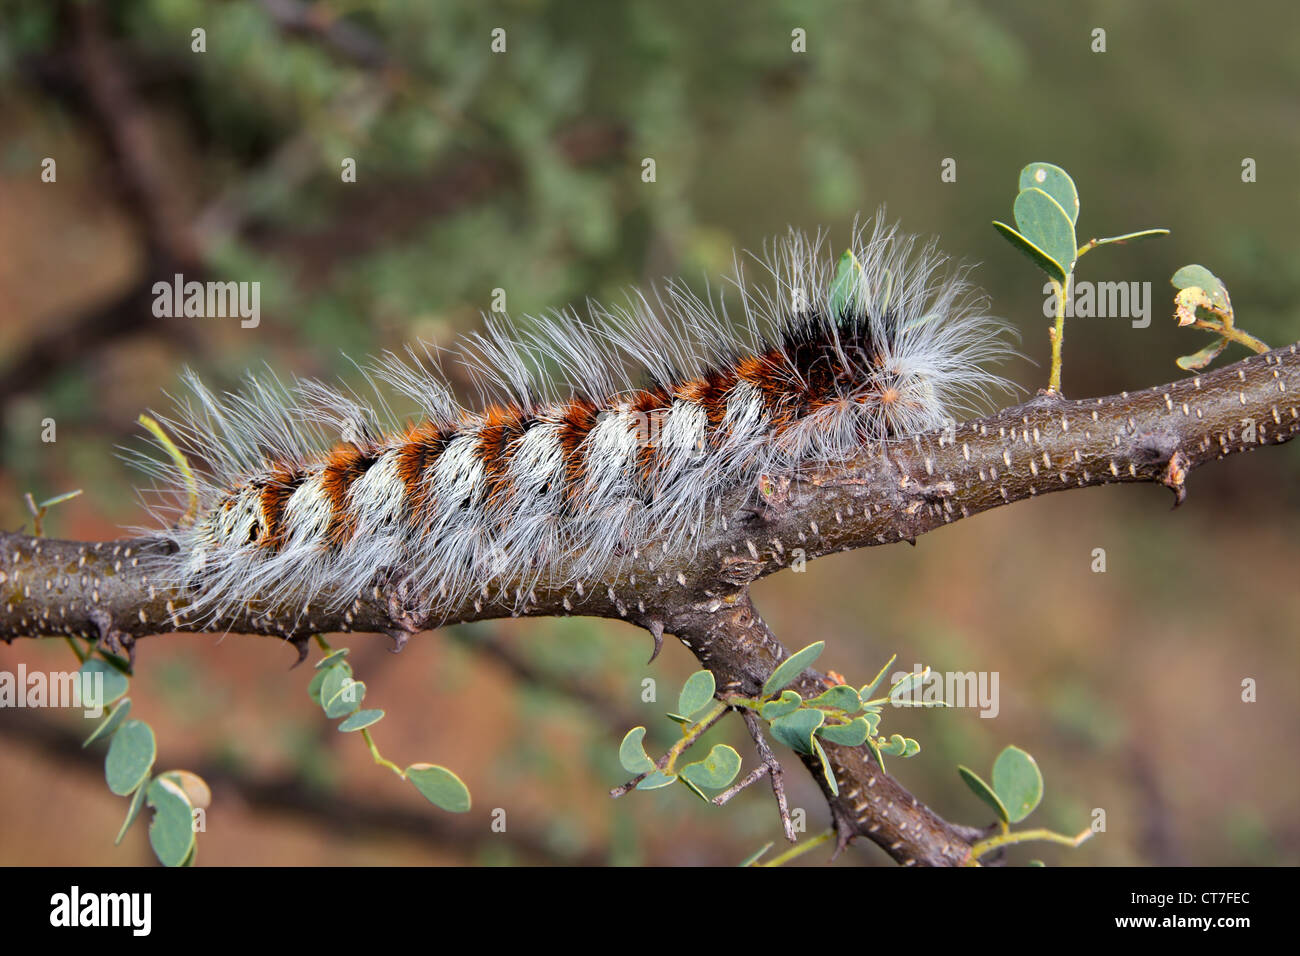 Hairy caterpillar sitting on a branch Stock Photo